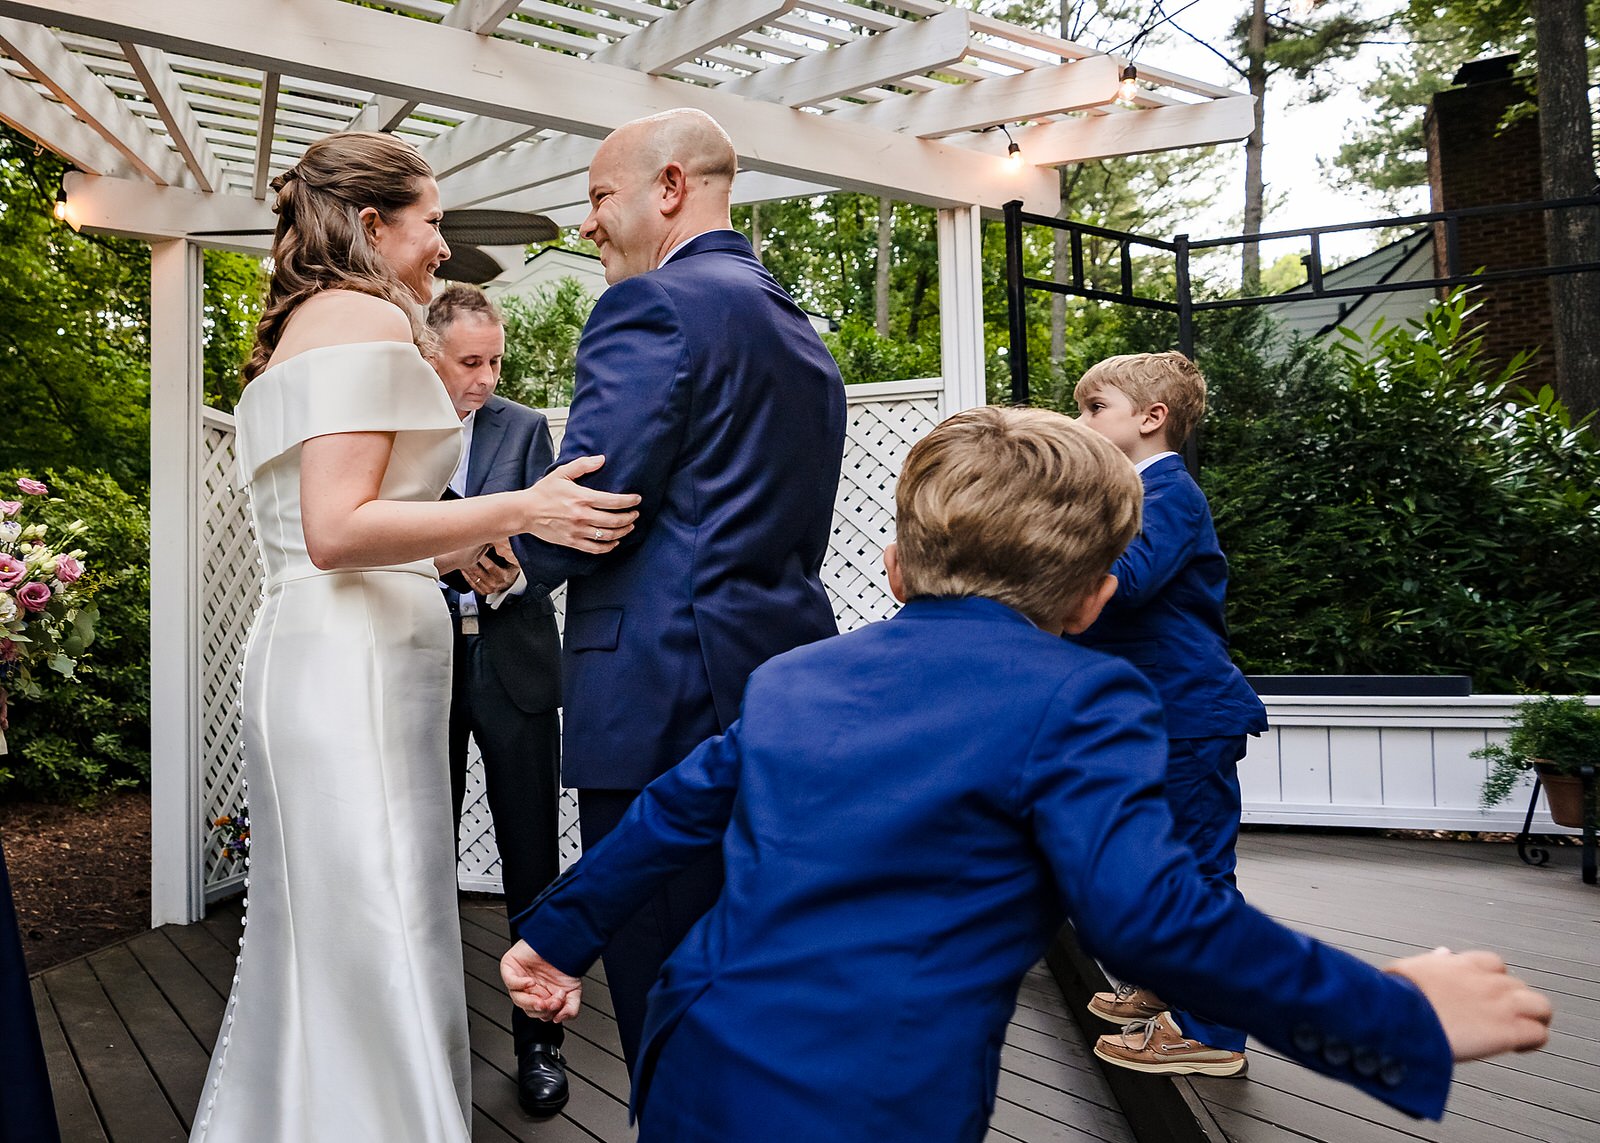 Groom's sons run by the camera as the couple exchanges rings